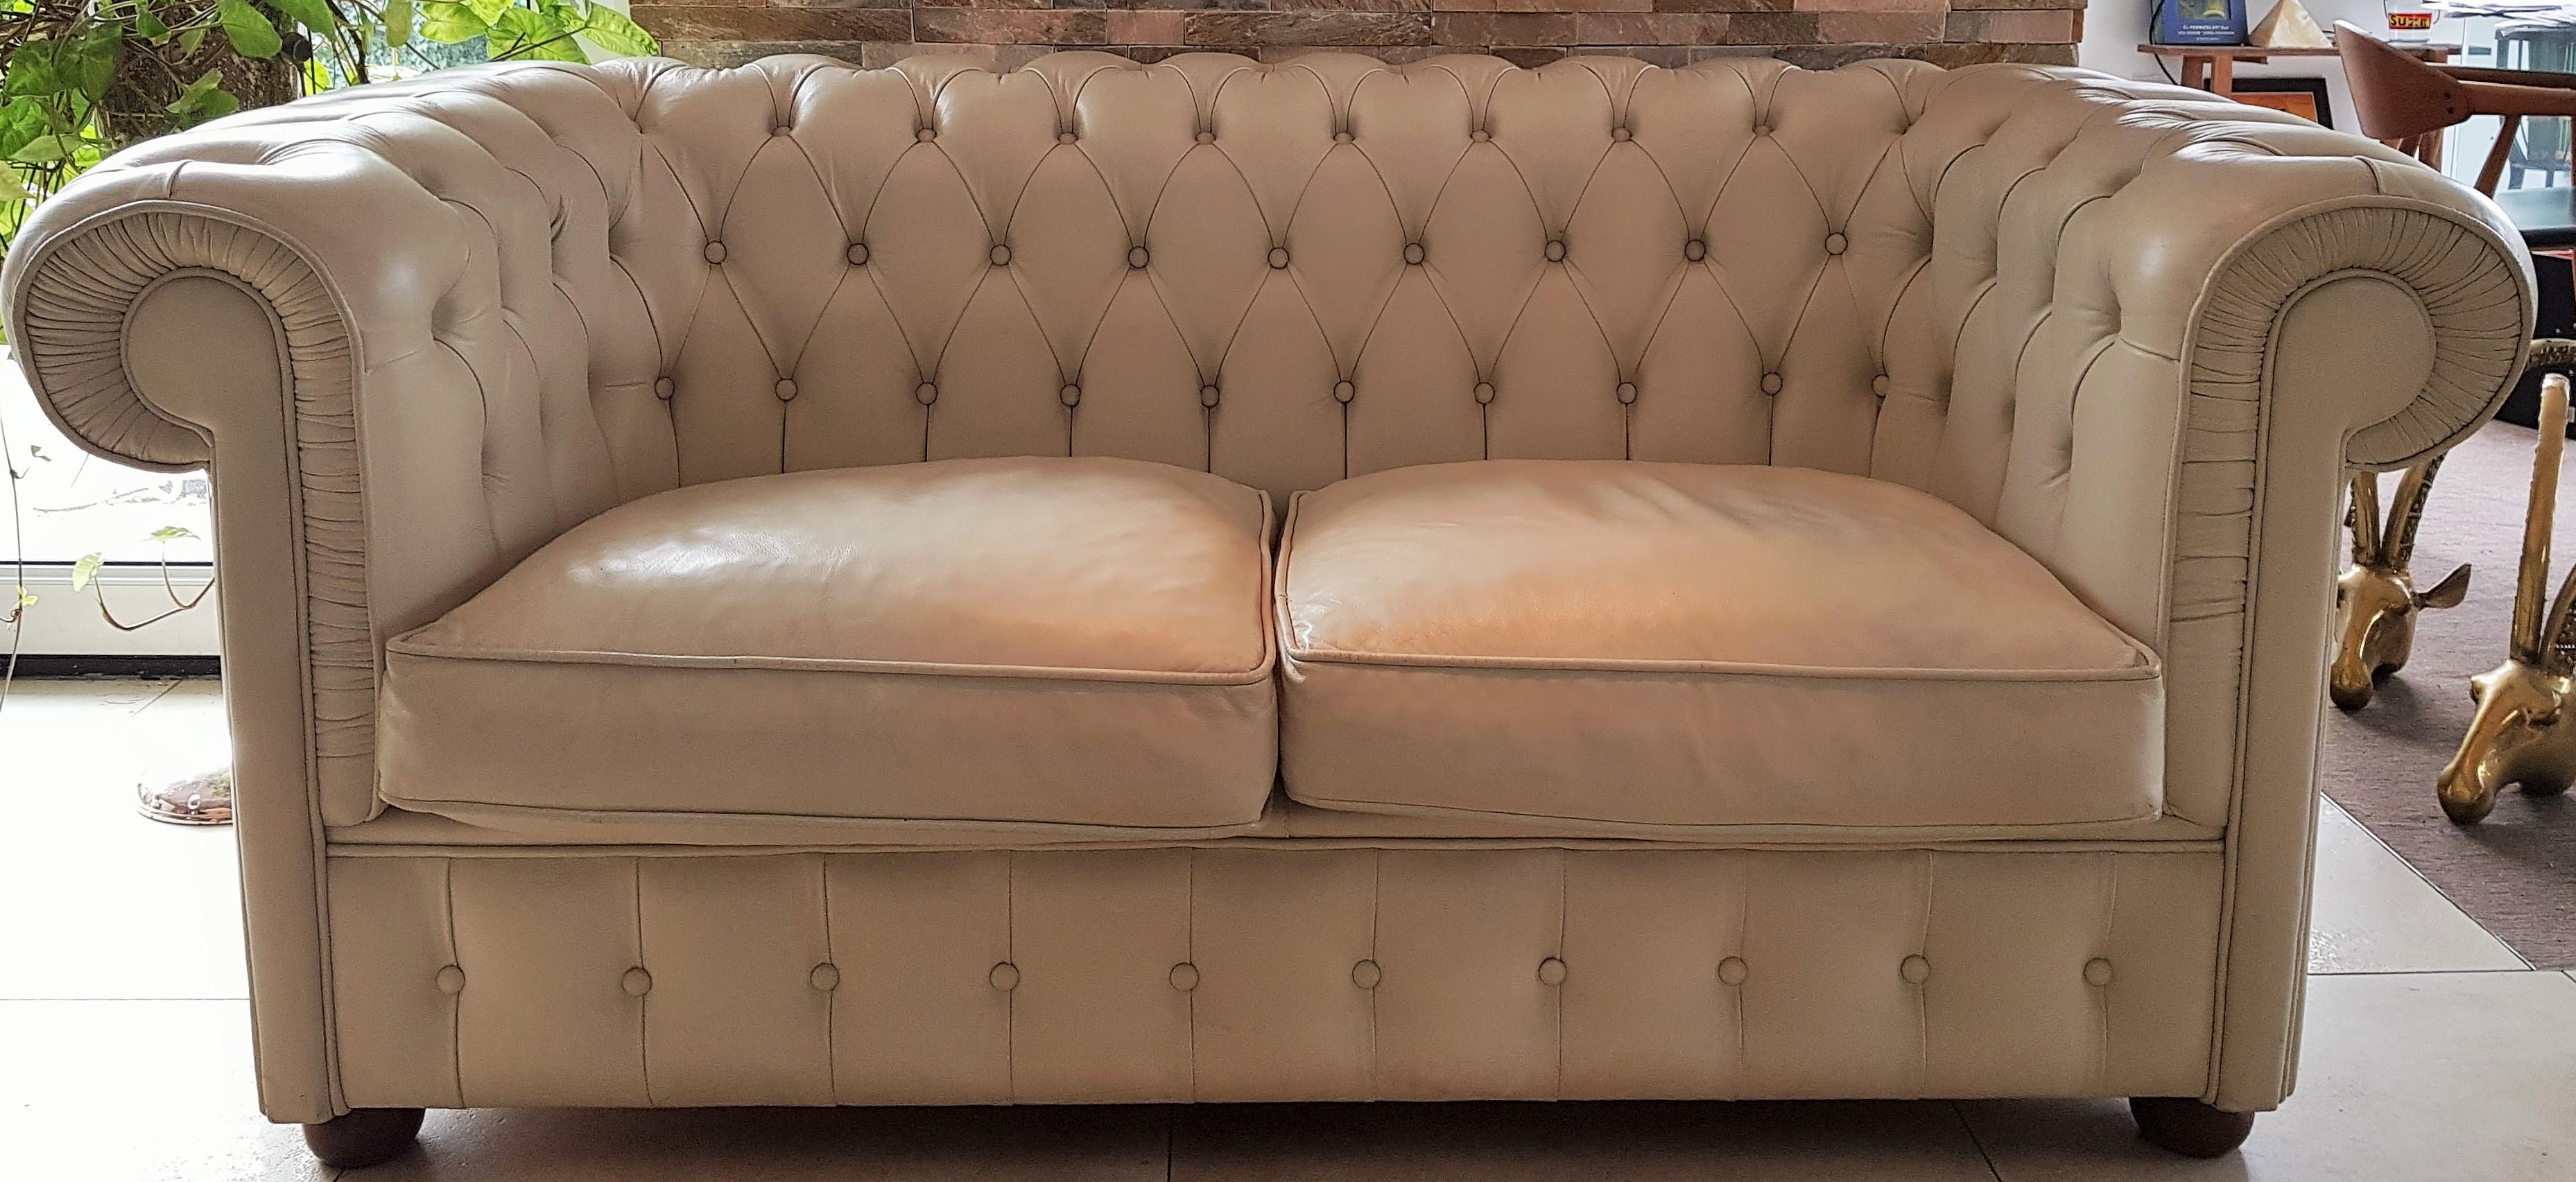 Midcentury Chesterfield Sofa Loveseat White Leather 11